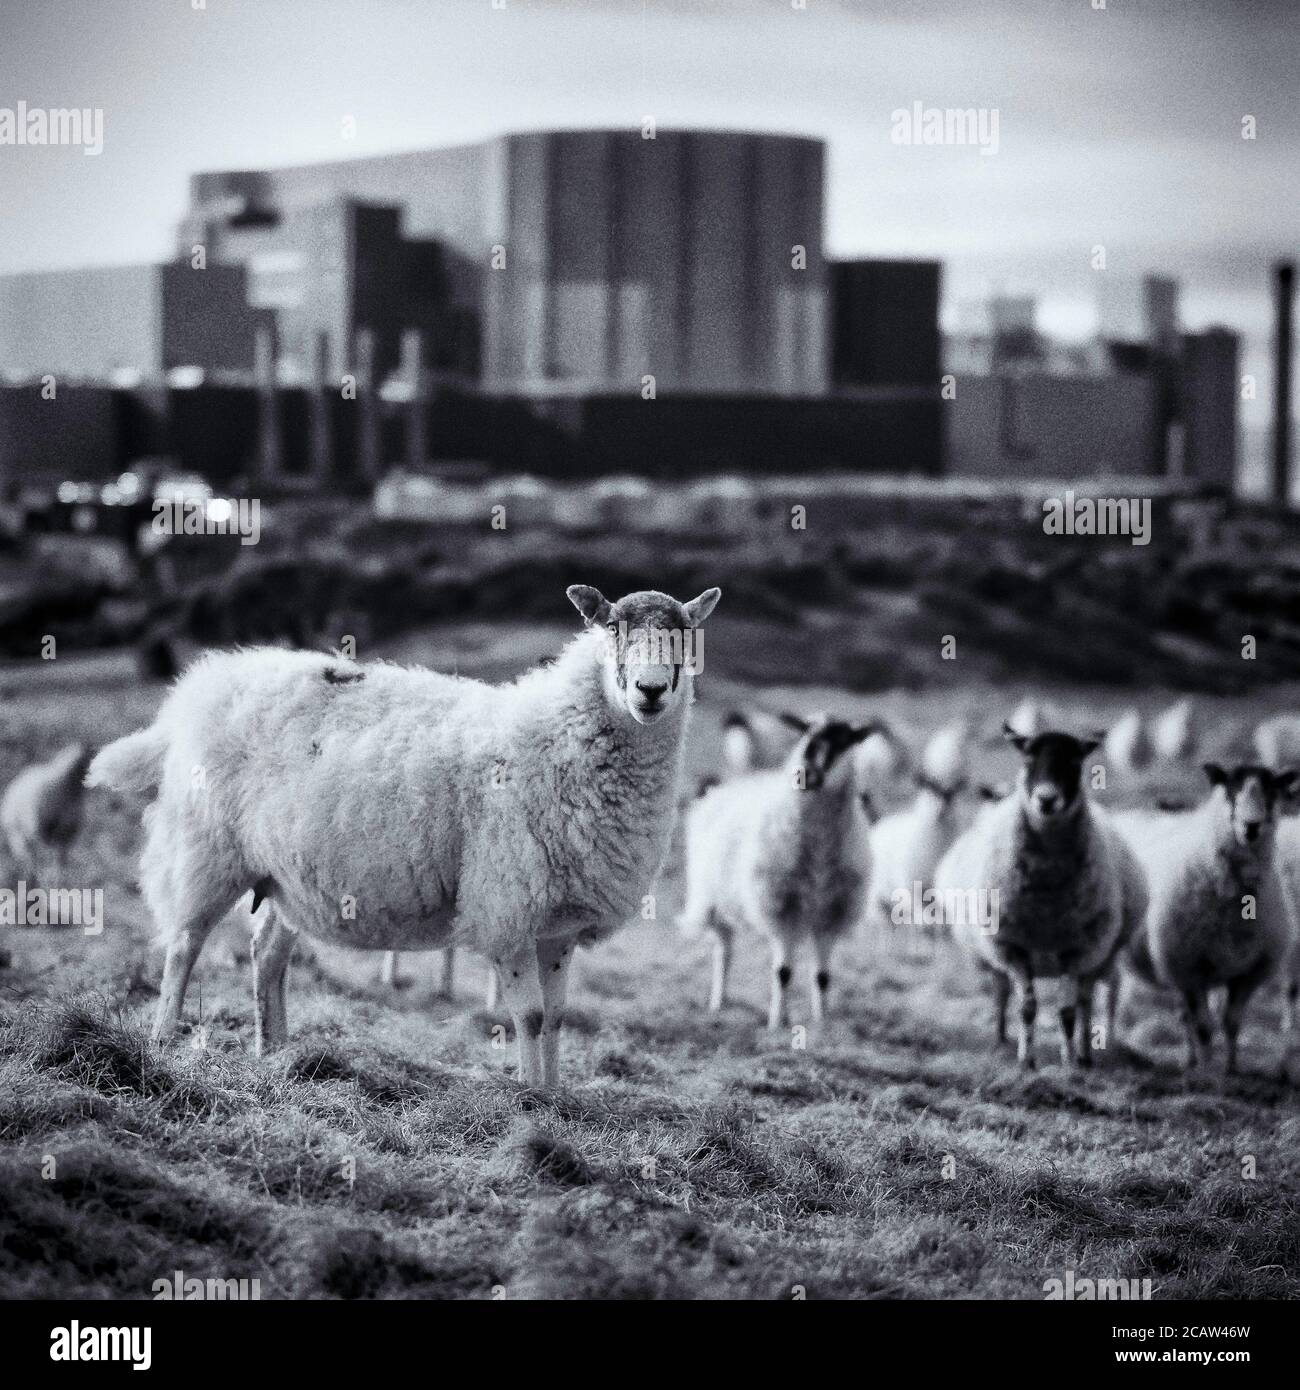 Wylfa (Wylfa Newydd) nuclear power station on CEMAES Anglesey, Wales, UK. With sheep in fore ground. Stock Photo